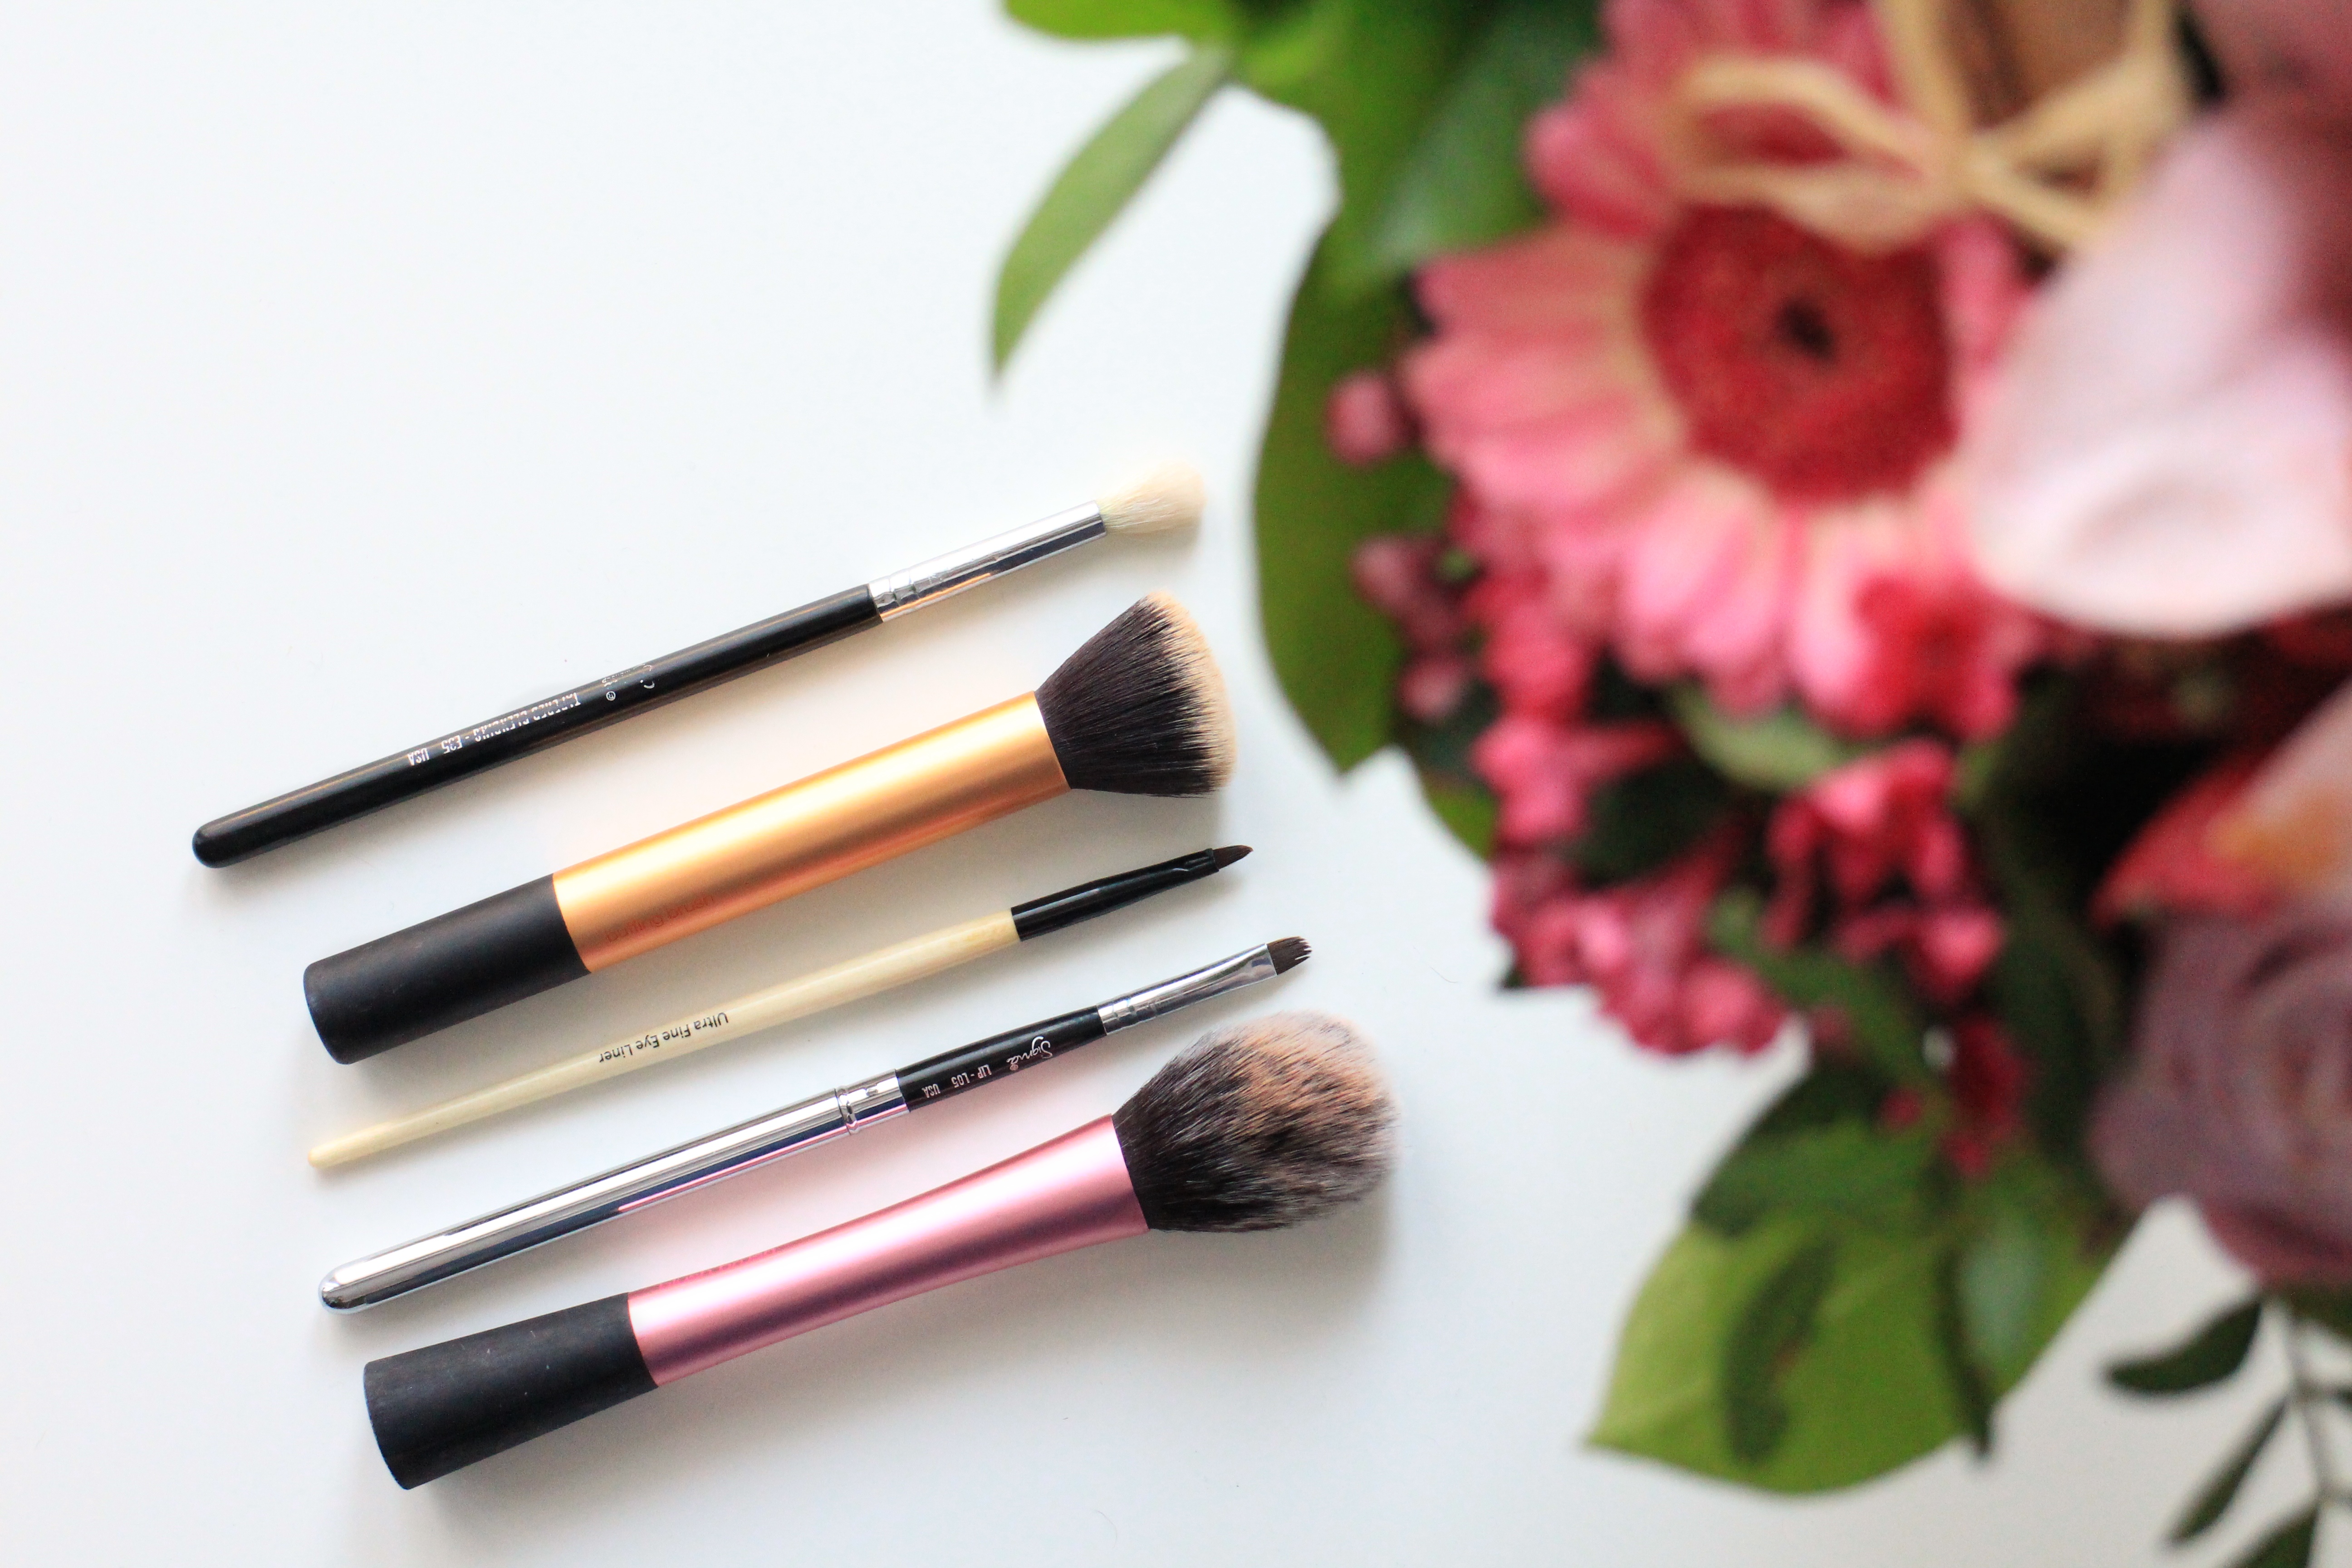 5 makeup brushes you need